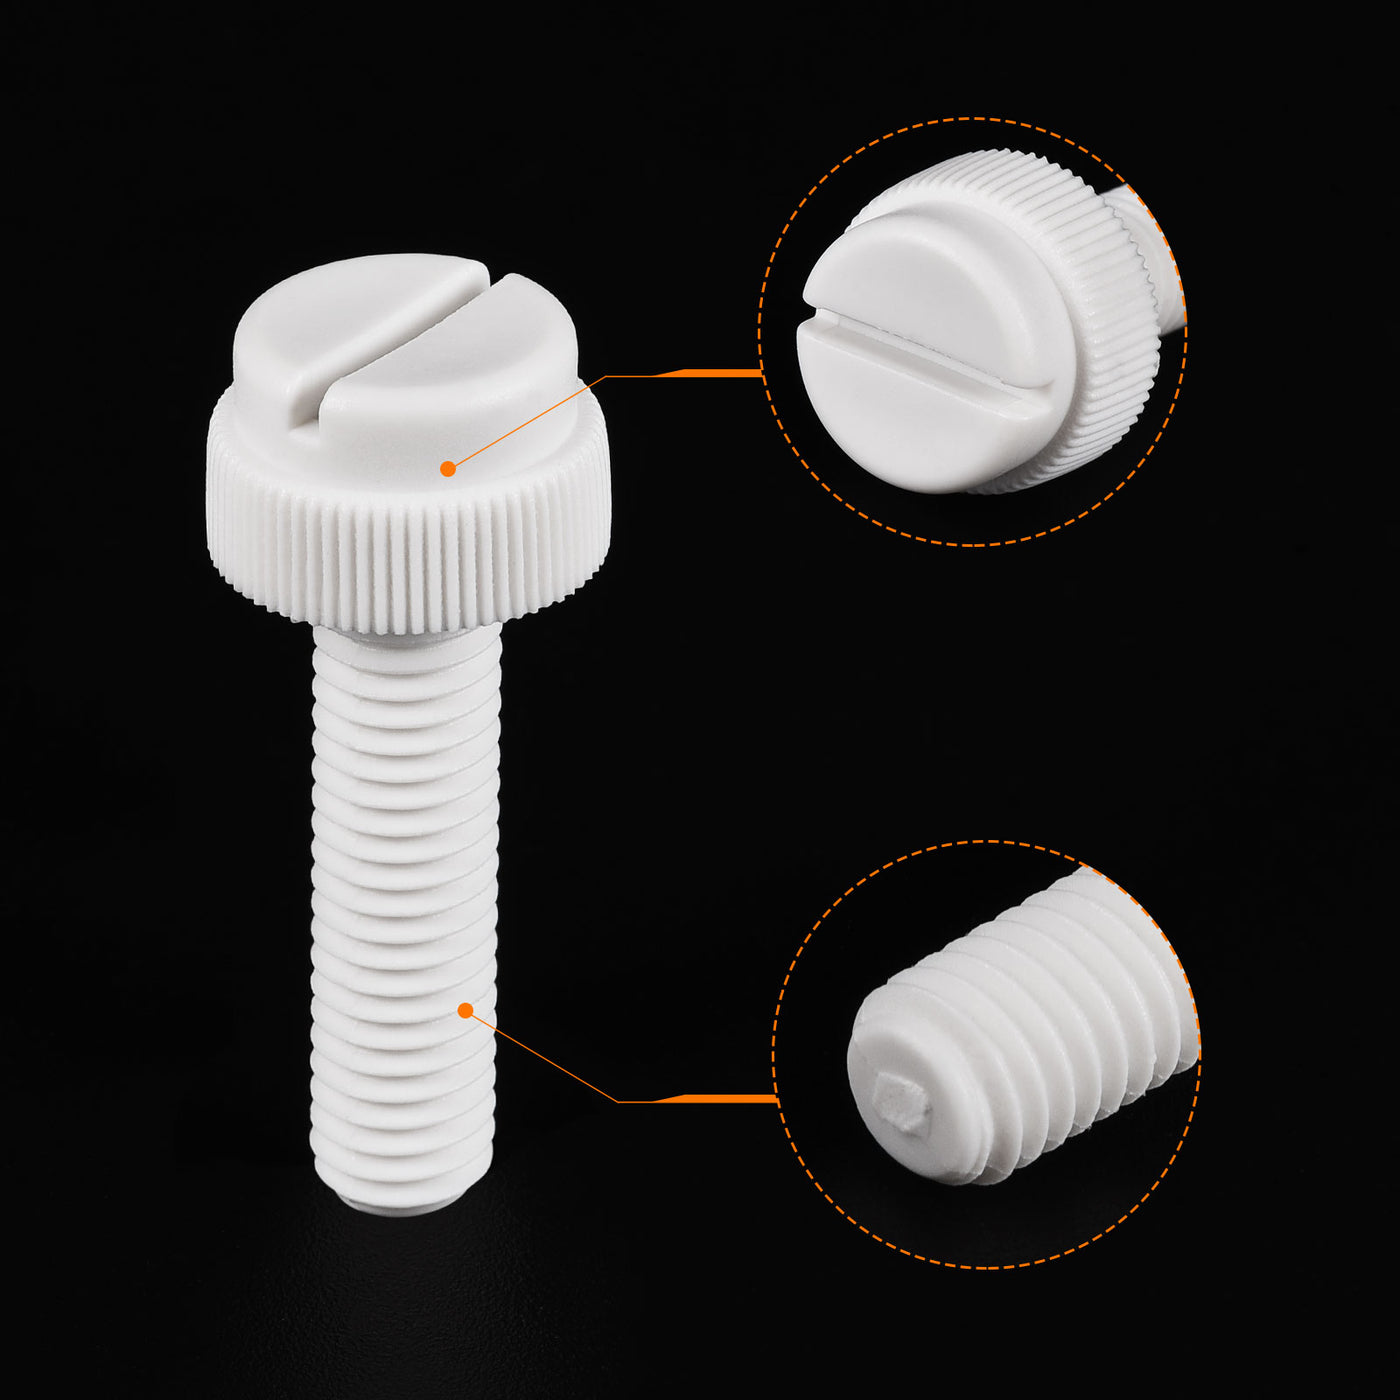 uxcell Uxcell Plastic Machine Screws Slotted Knurled Fasteners Bolts for Electronics, Communications